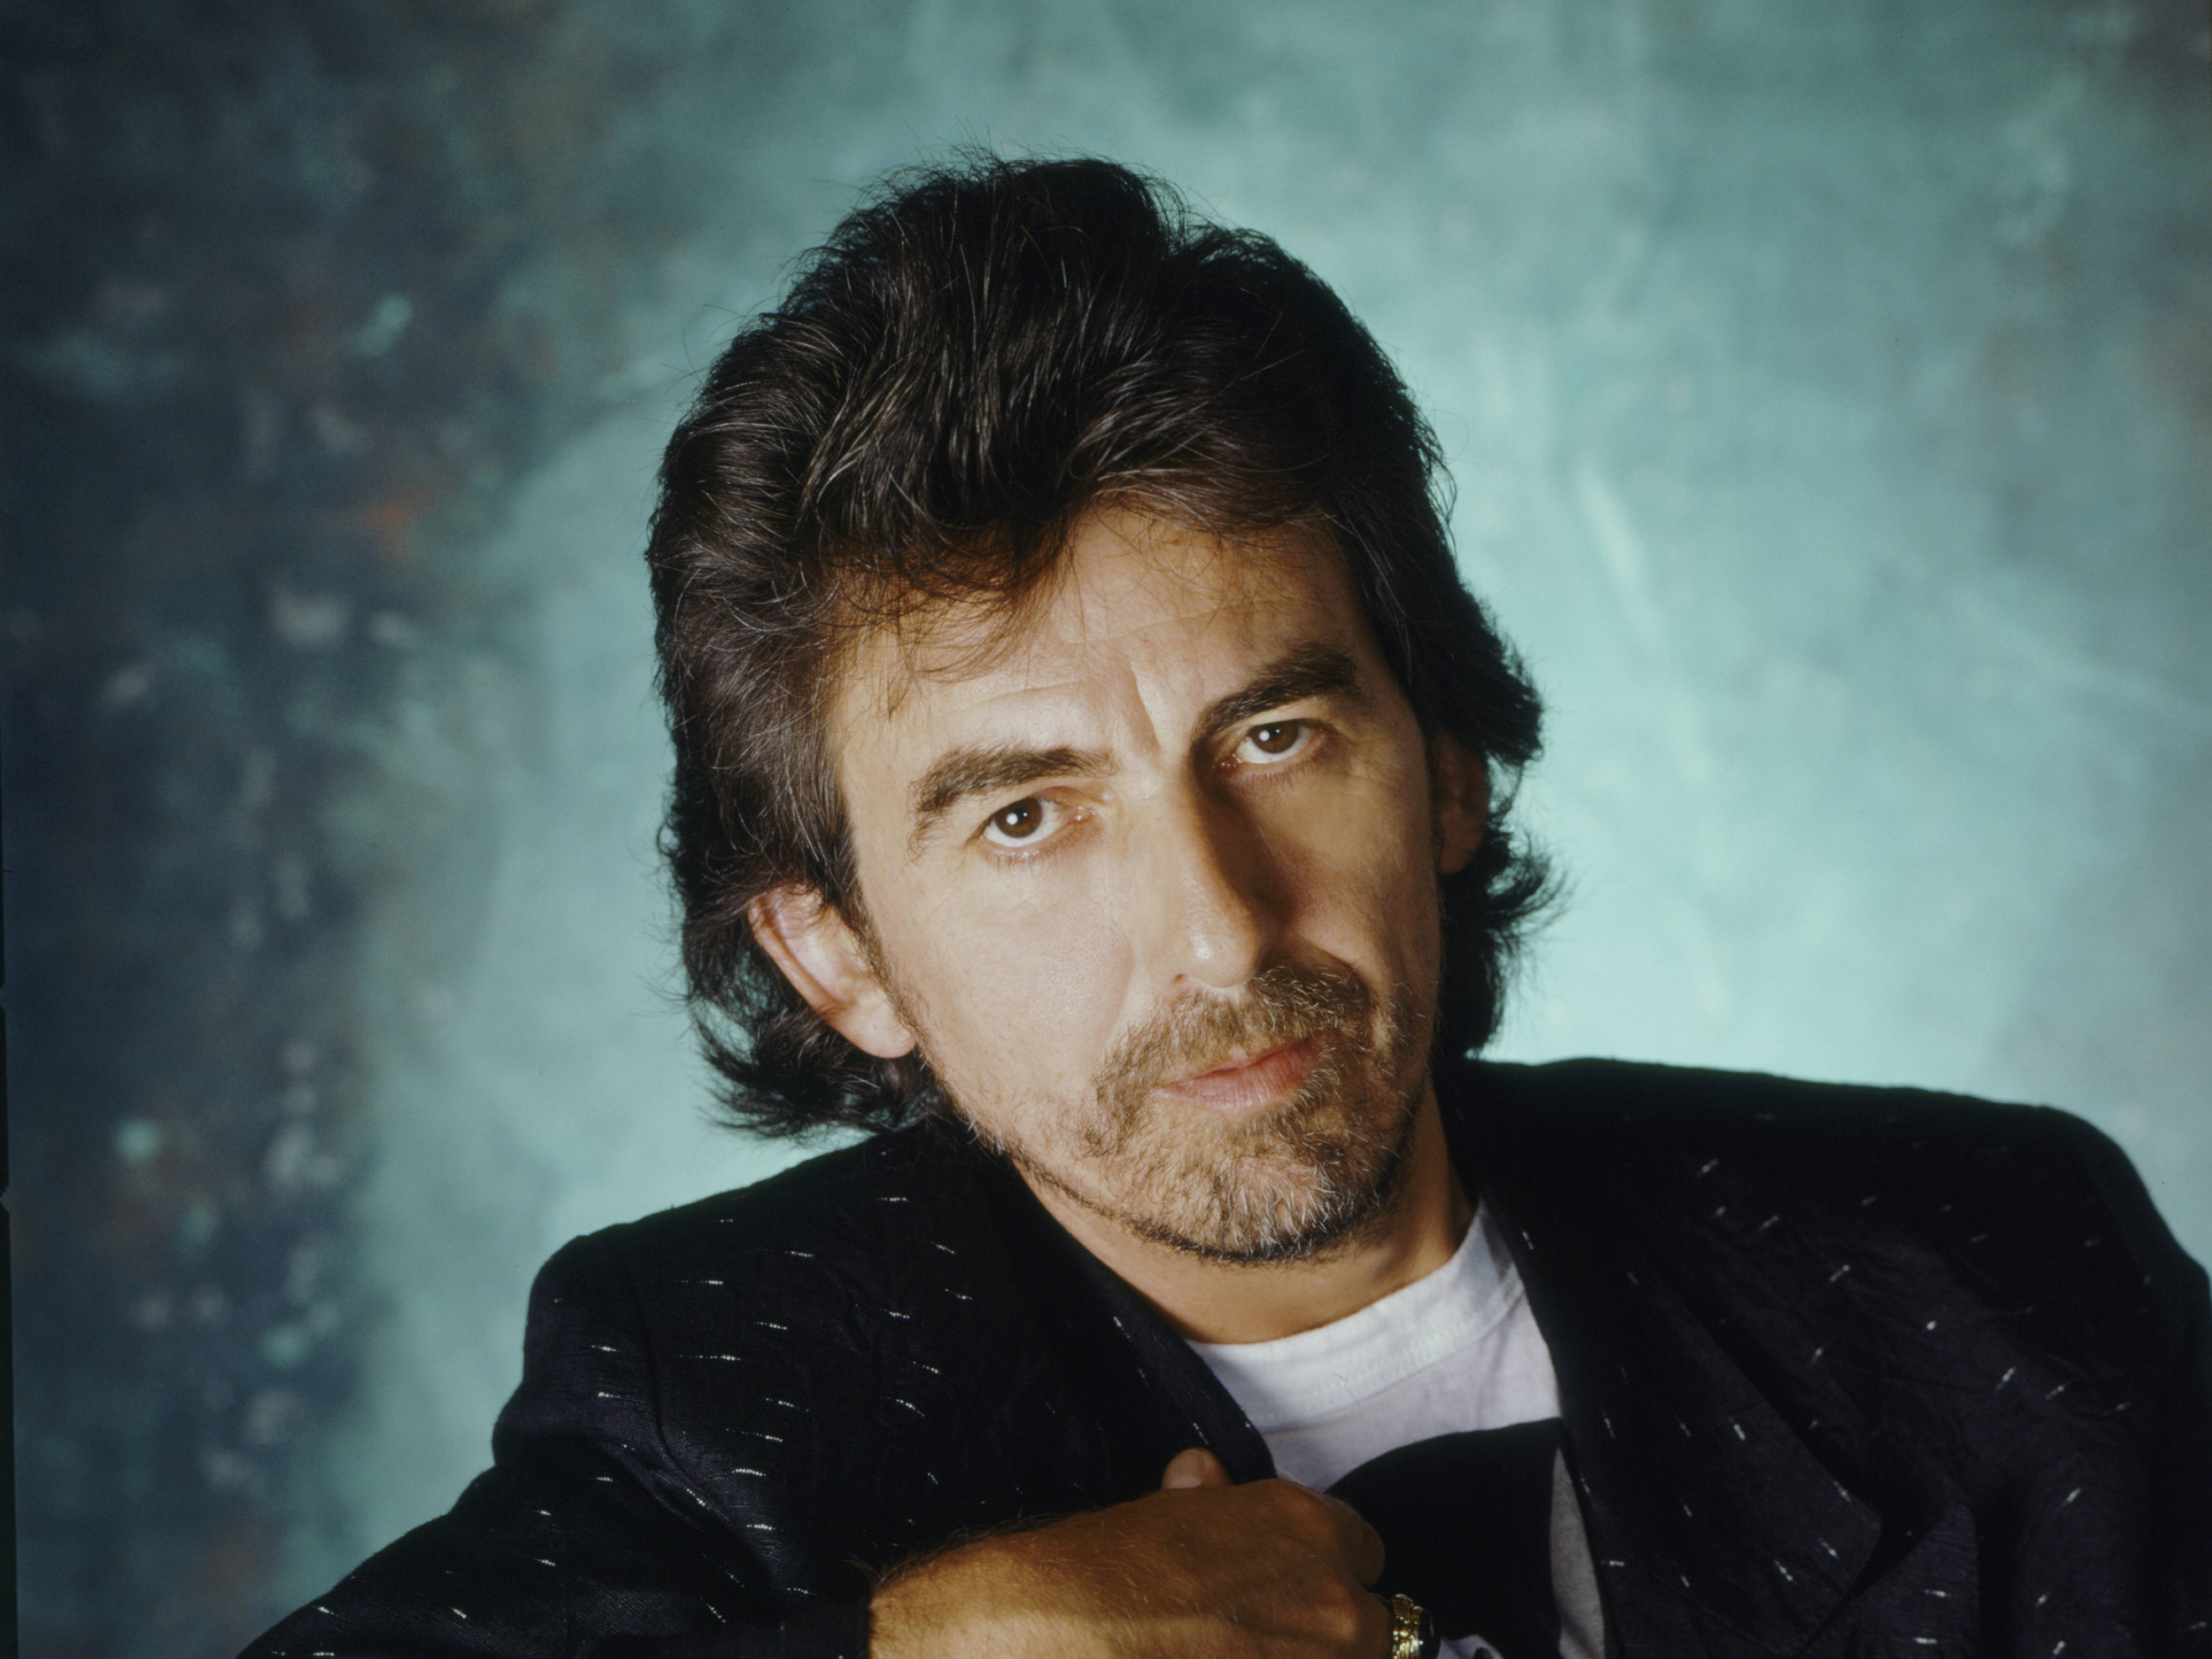 George Harrison's 10 greatest songs, ranked - Smooth